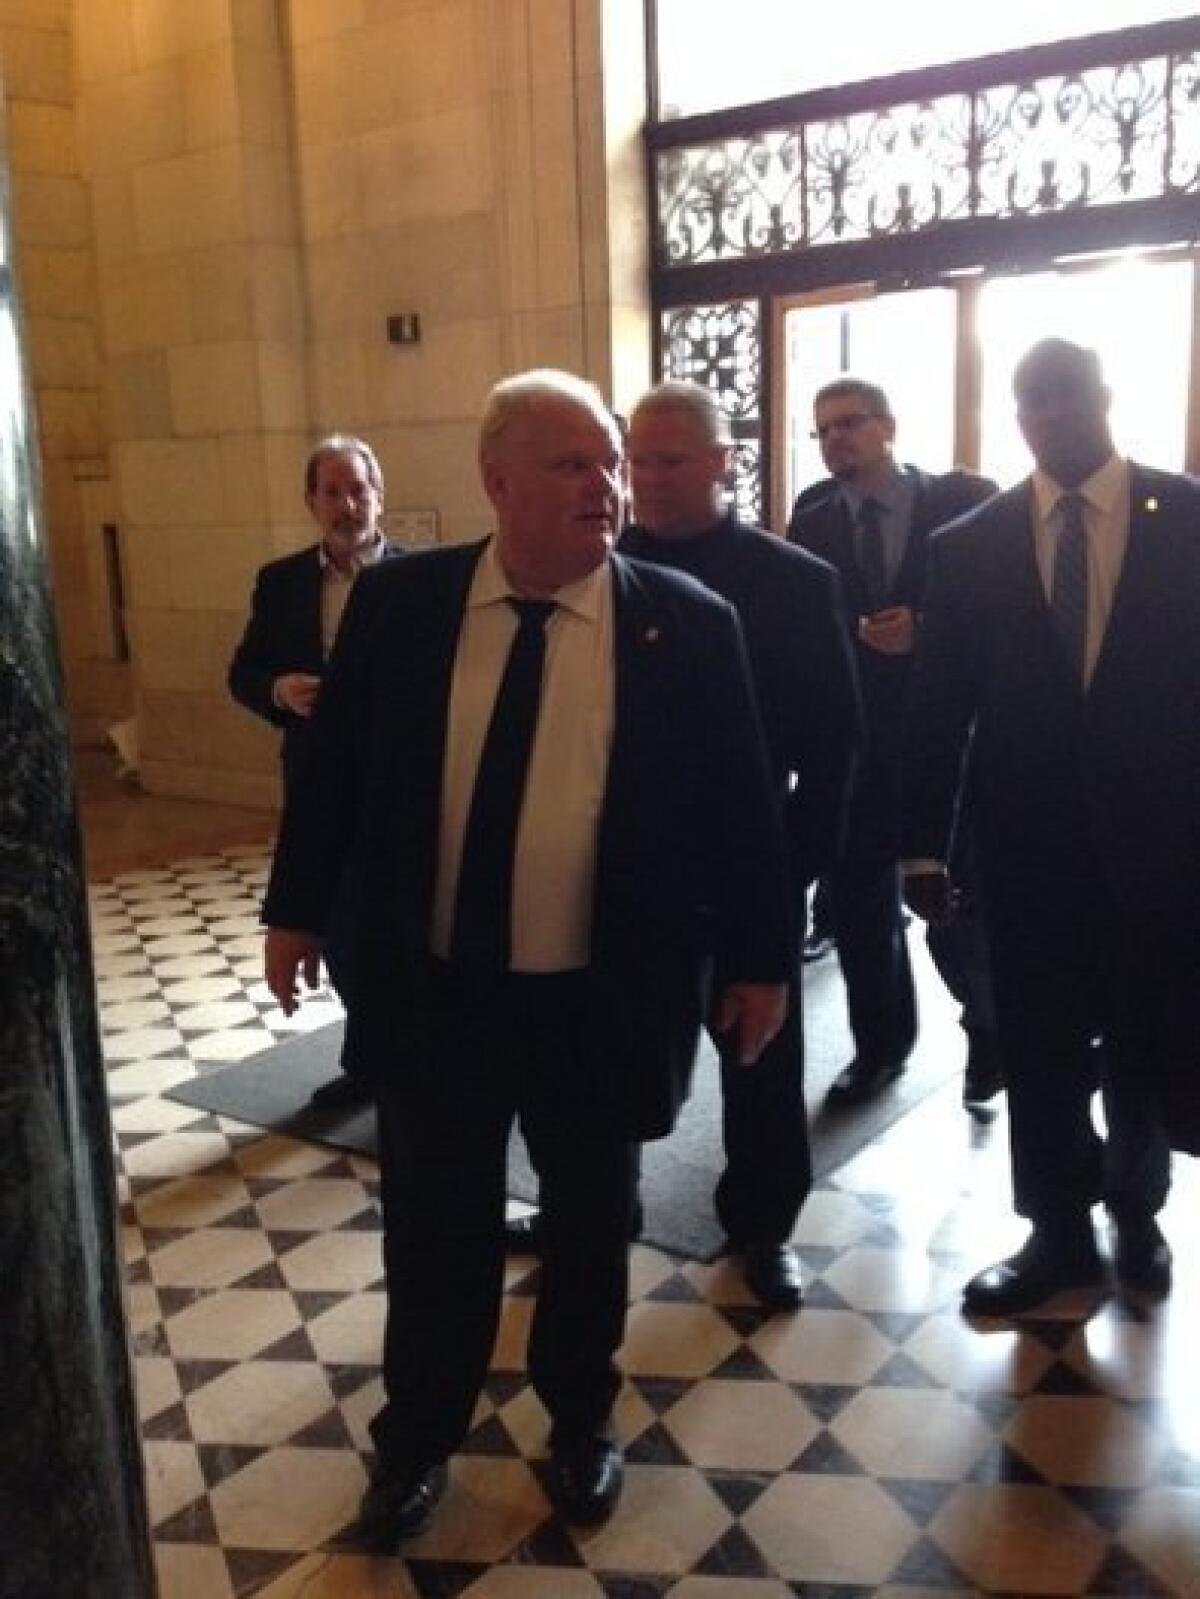 Toronto Mayor Rob Ford paid a visit to L.A. City Hall on Monday.